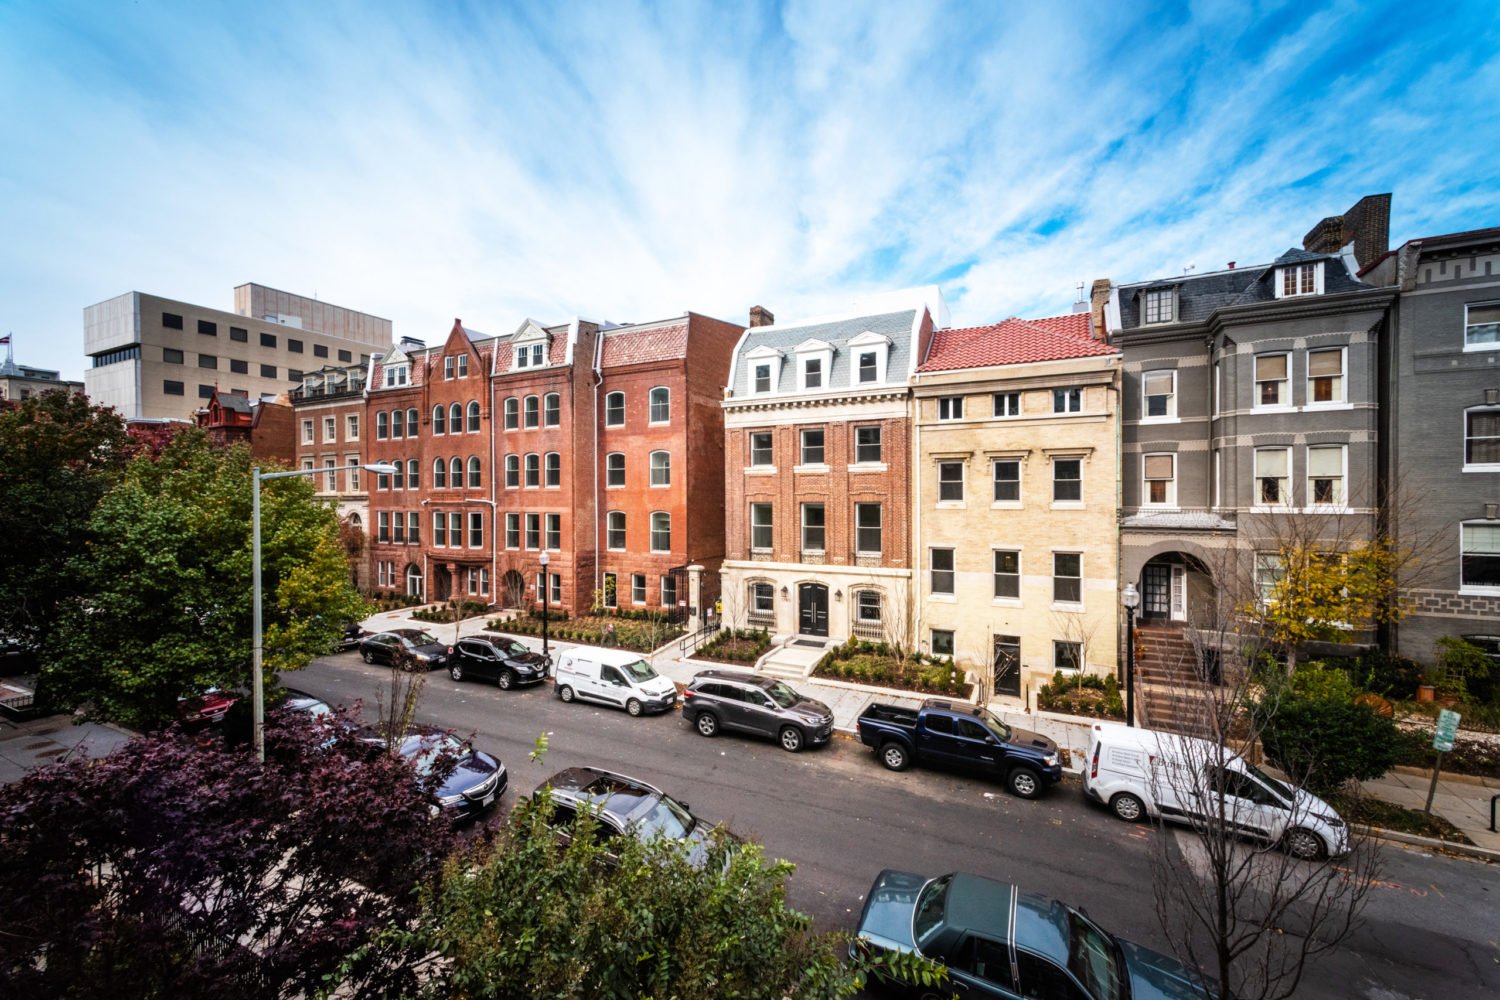 Discover Incomparable Dupont Circle Luxury at 1745N